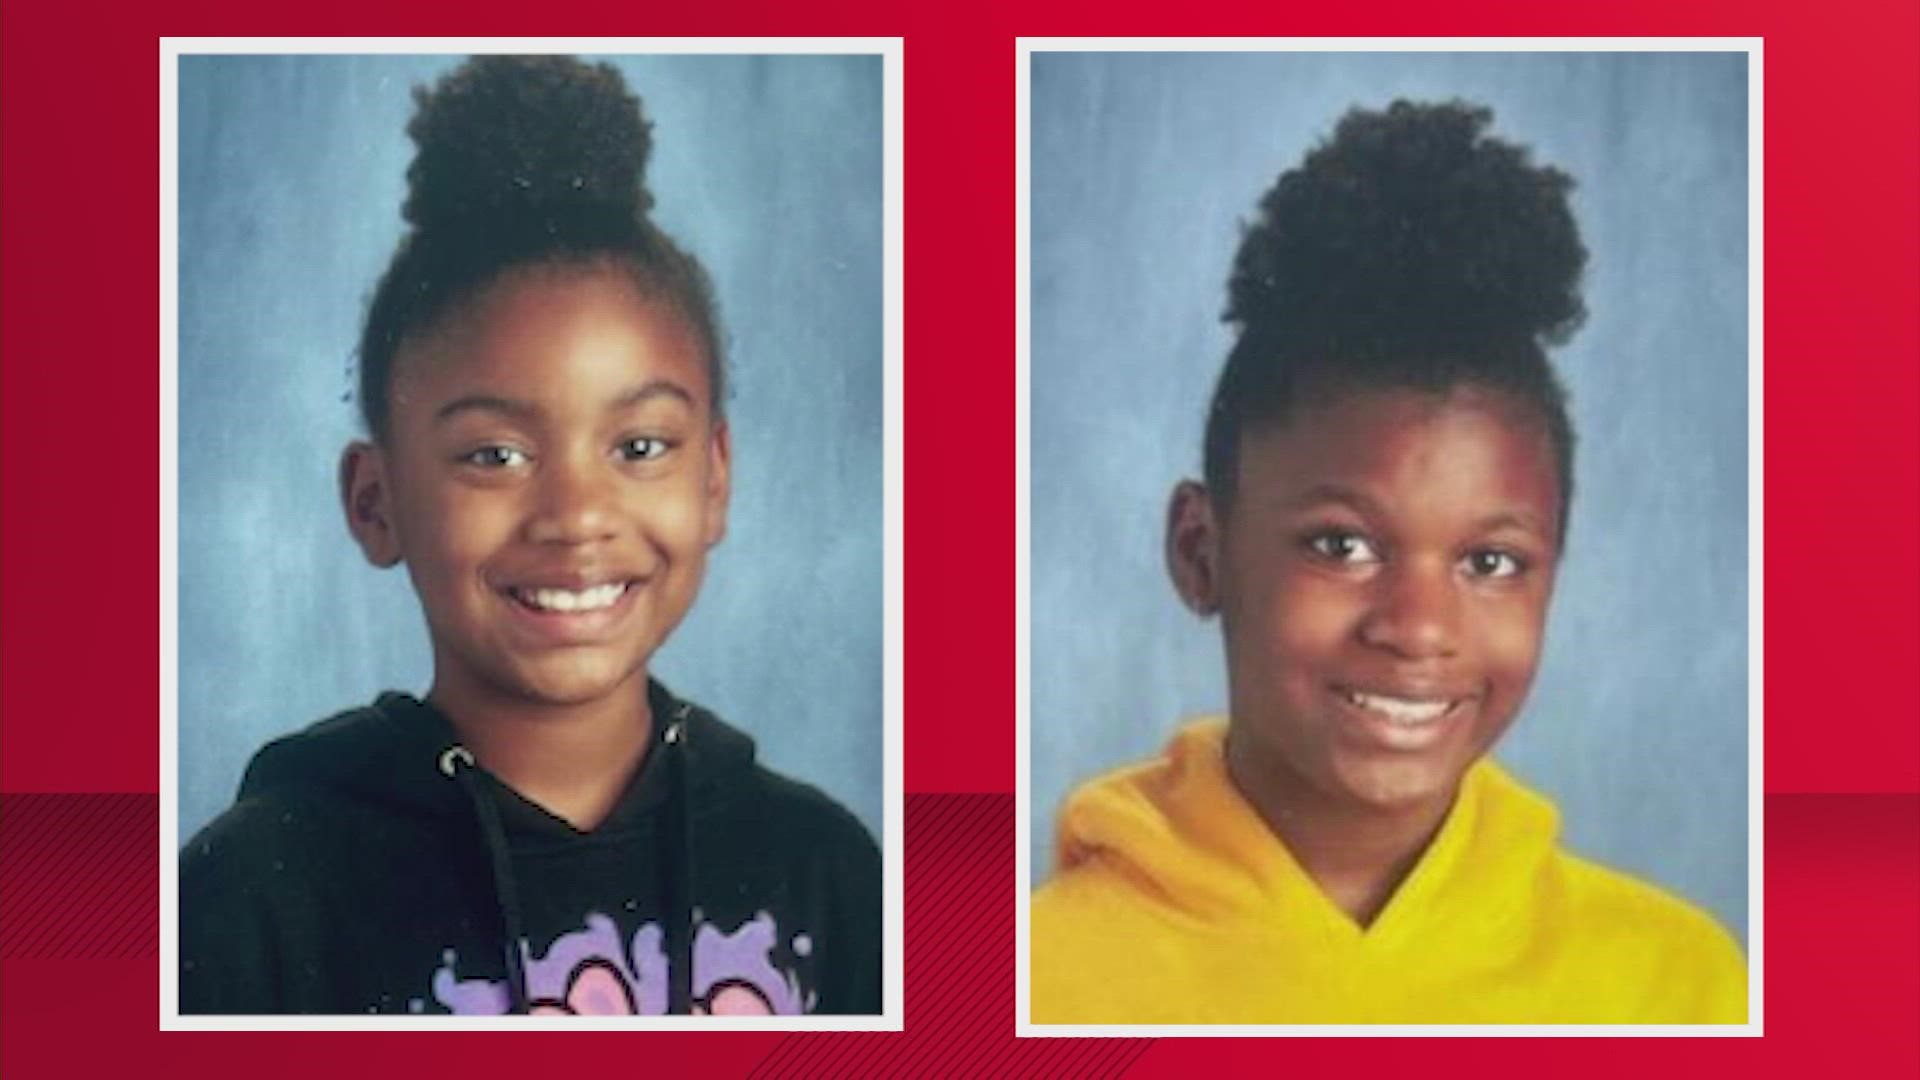 Amirah Perryman, the youngest of two missing sisters was found. Kamiah remains missing, police said.